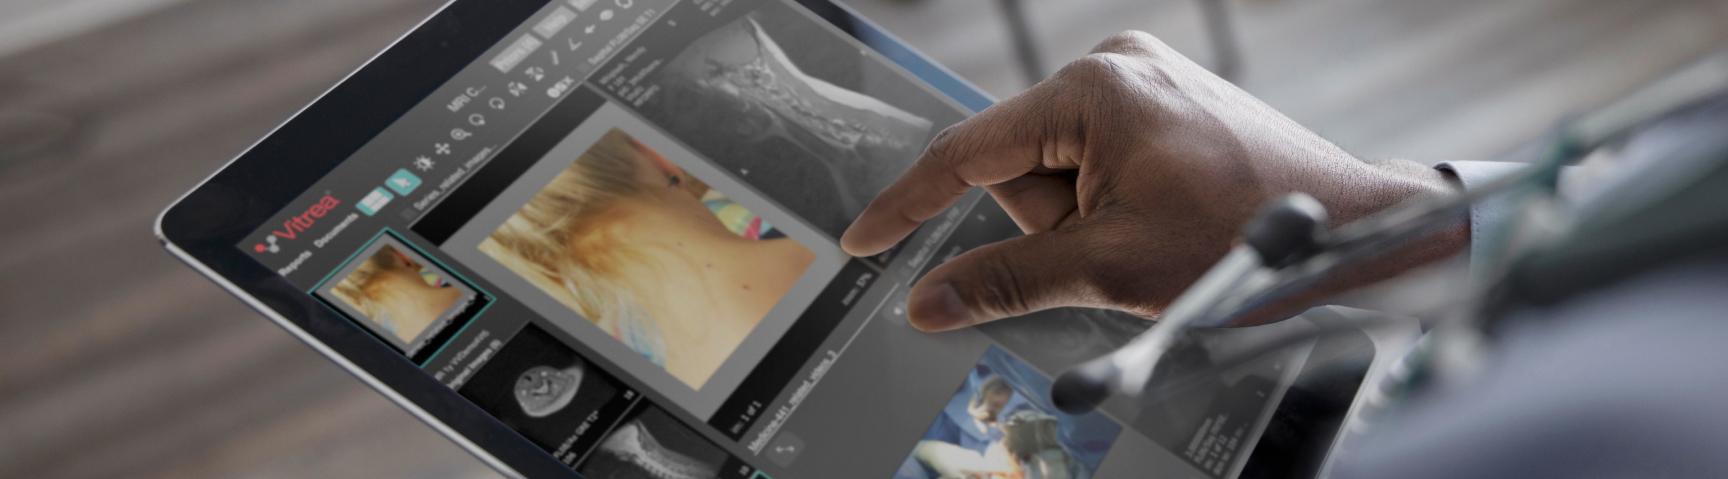 Enterprise imaging viewers intro image of a doctor using Vitrea on an iPad.